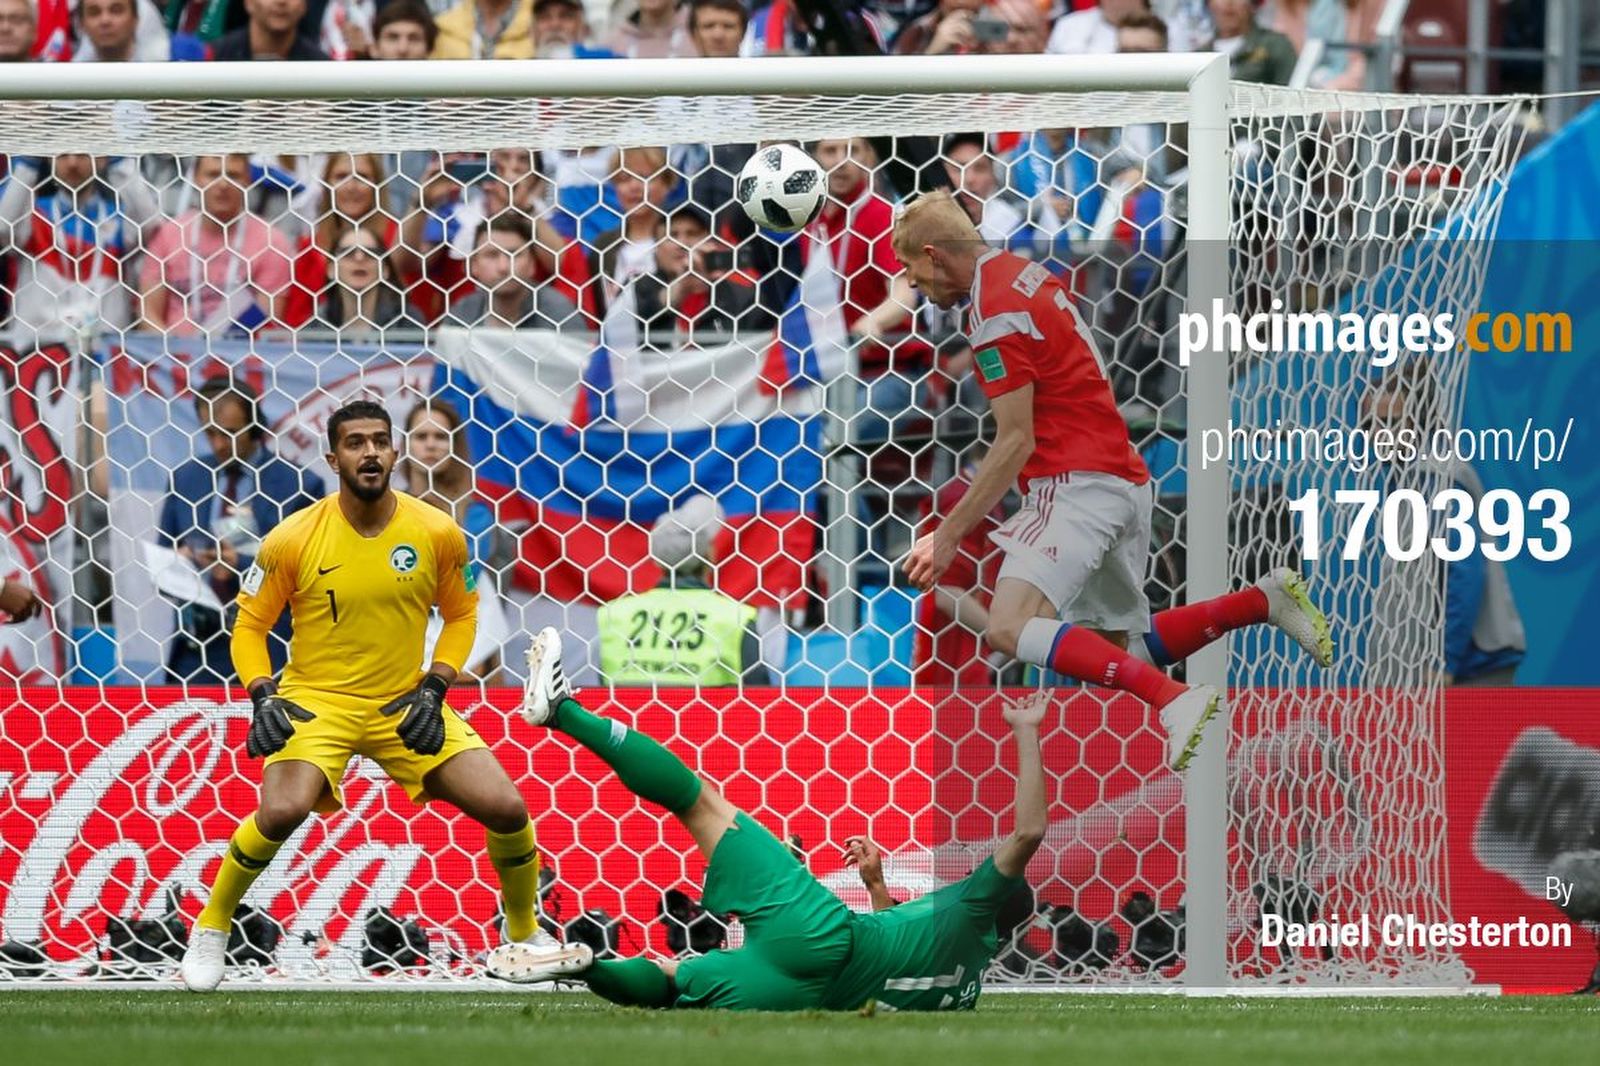 Yuriy Gazinskiy scores the first goal of the World Cup